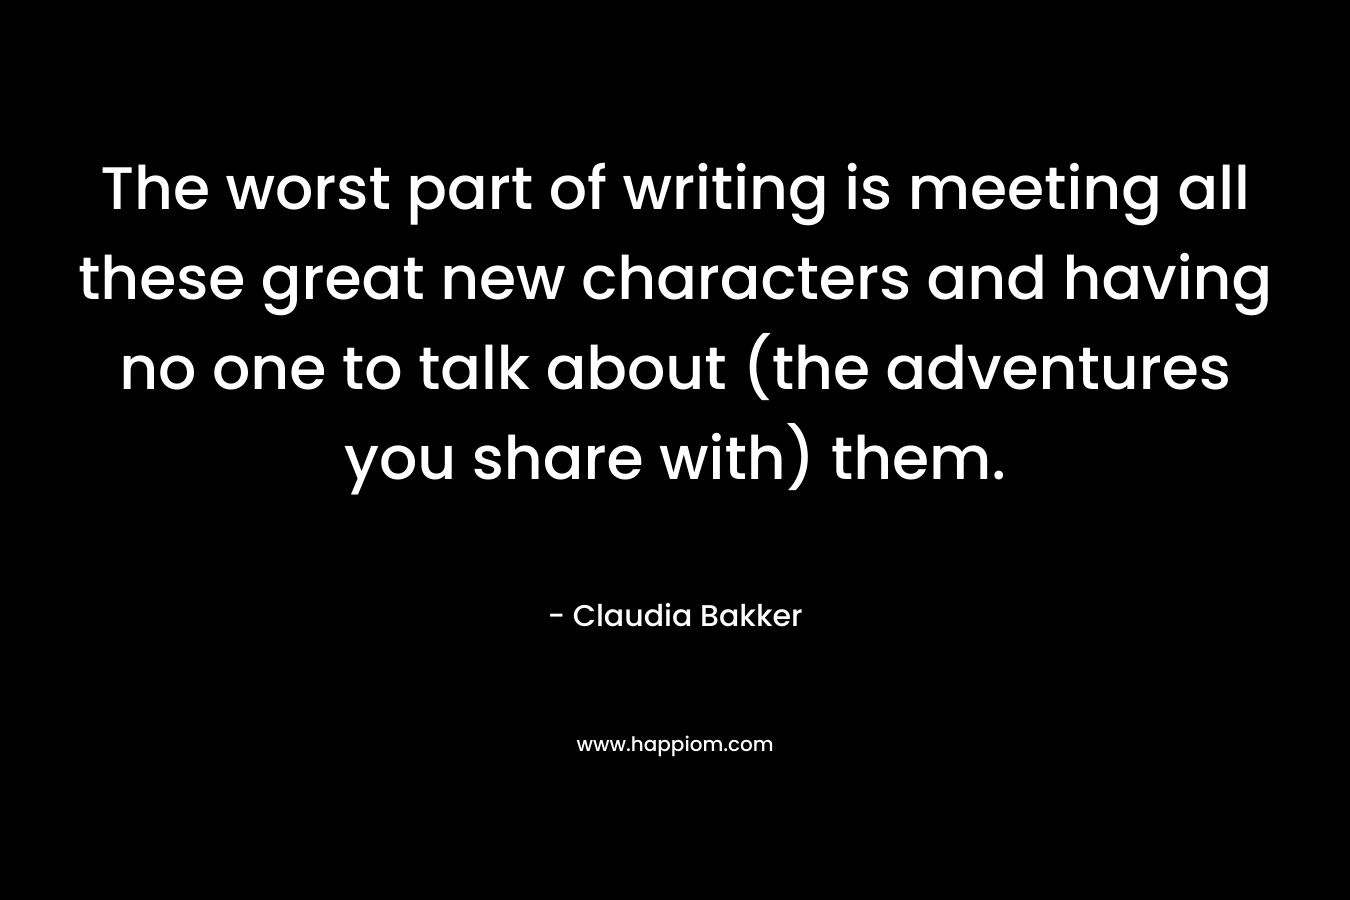 The worst part of writing is meeting all these great new characters and having no one to talk about (the adventures you share with) them.